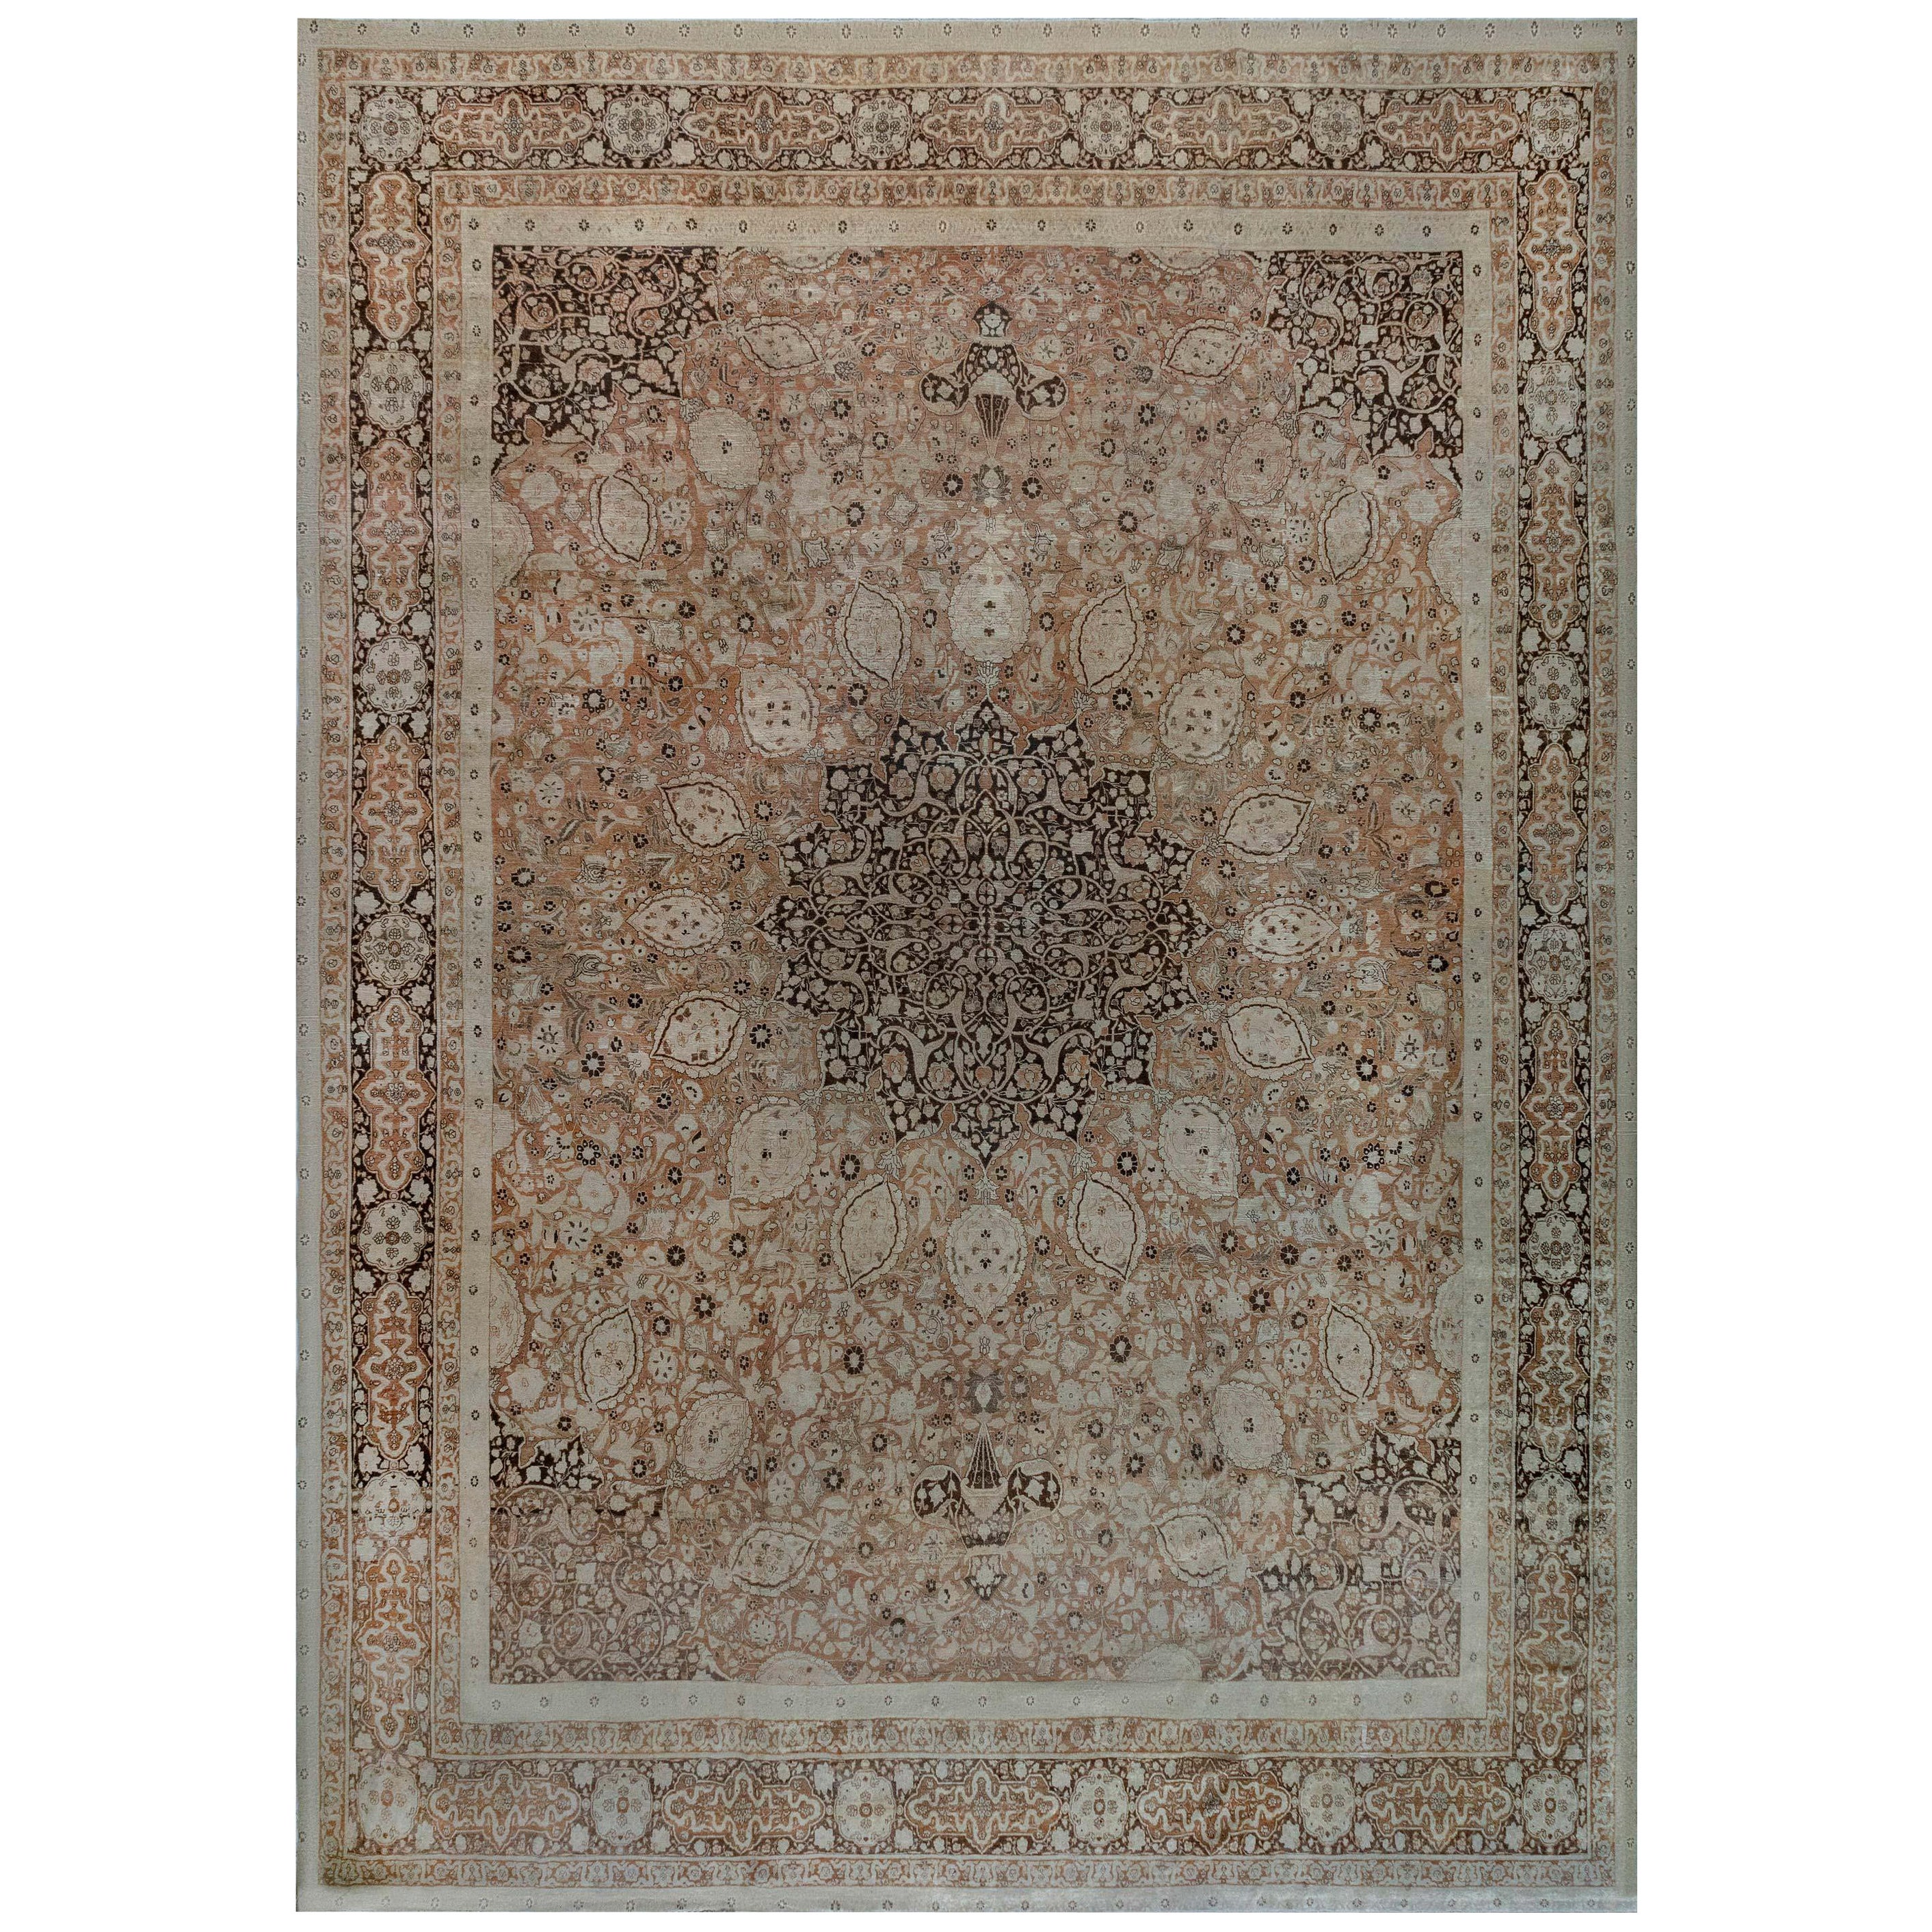 Oversized 19th Century Persian Tabriz Wool Rug For Sale